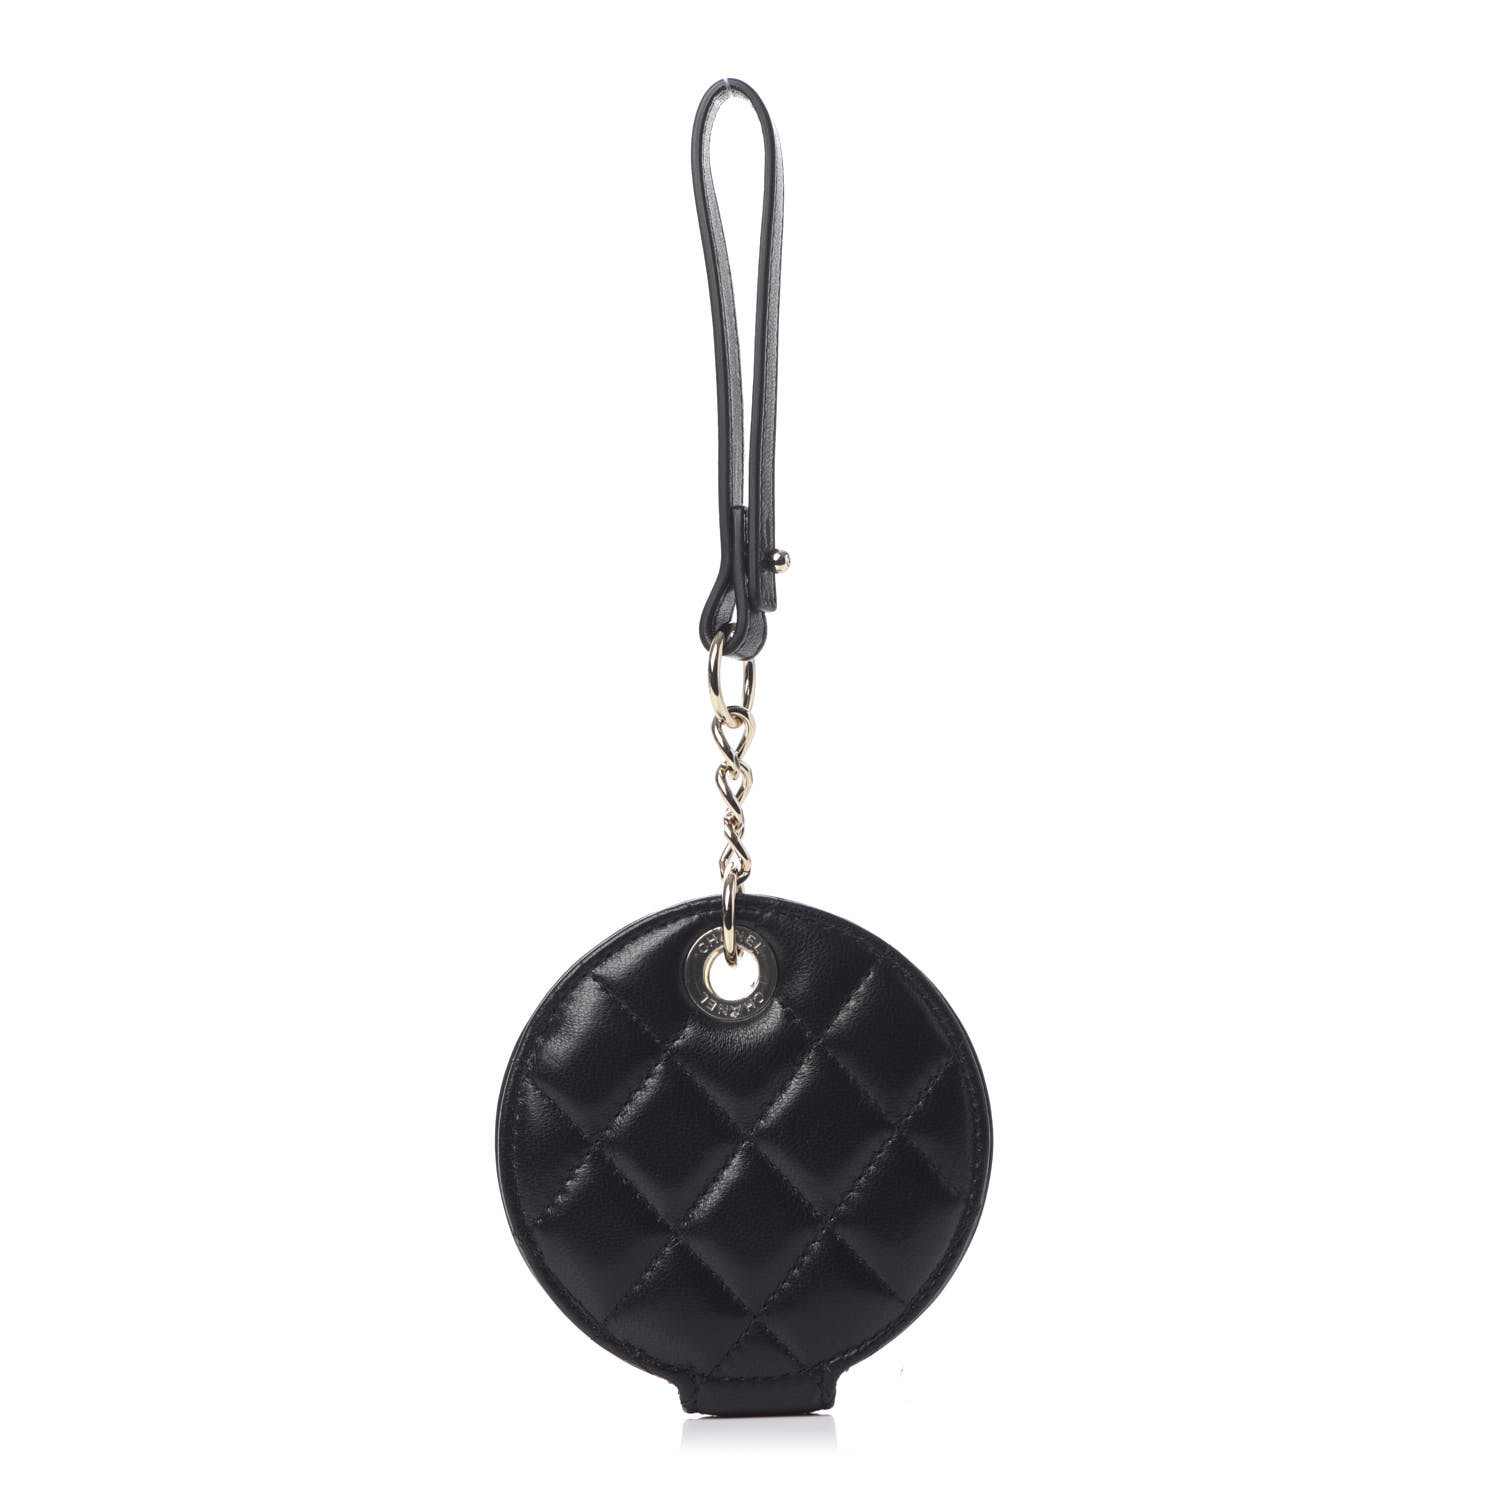 CHANEL Lambskin Quilted Round Luggage Tag Black 593510